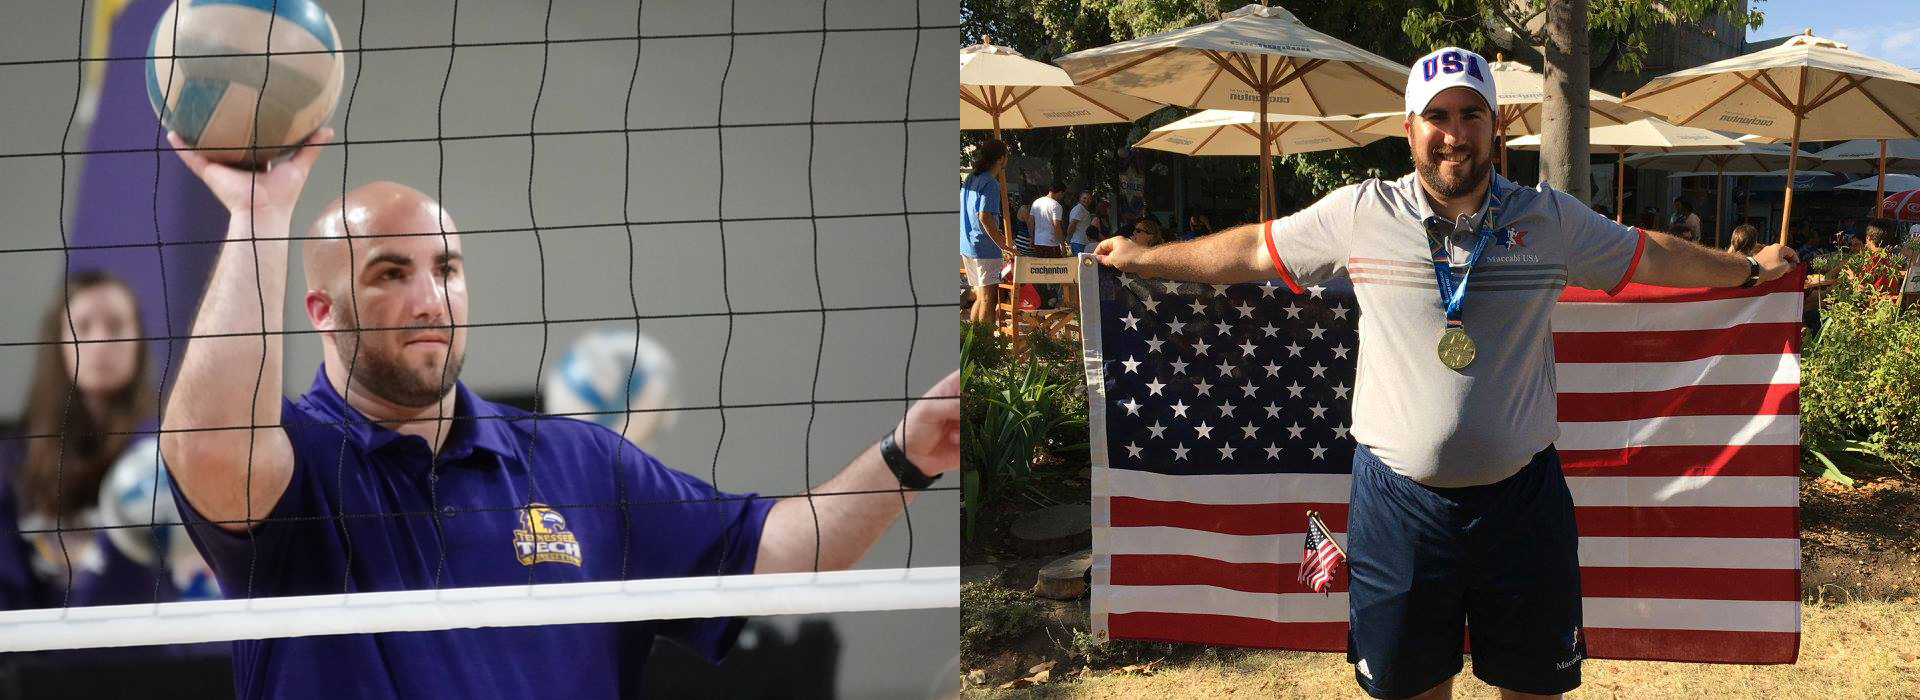 Weinberg selected as head coach of USA women's volleyball open team for 2022 Maccabiah Games